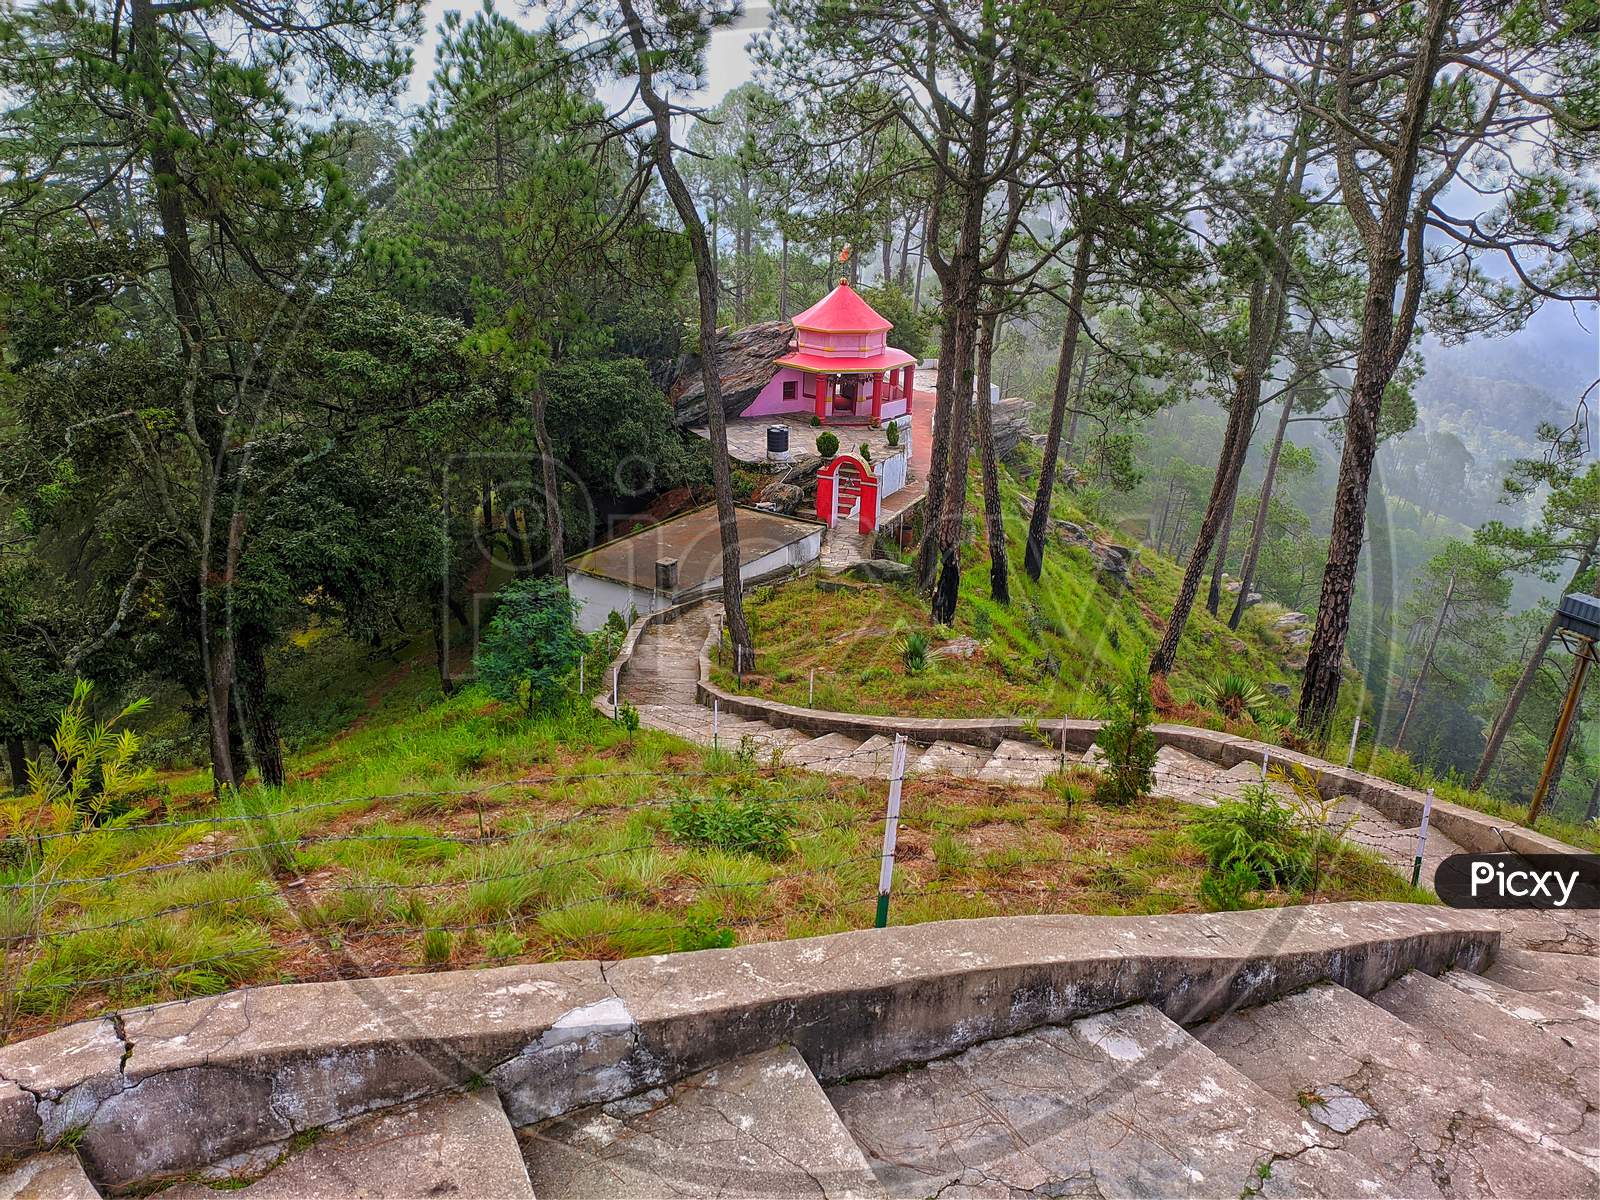 this is a picture of kasar devi temple in almora.temple in forest.